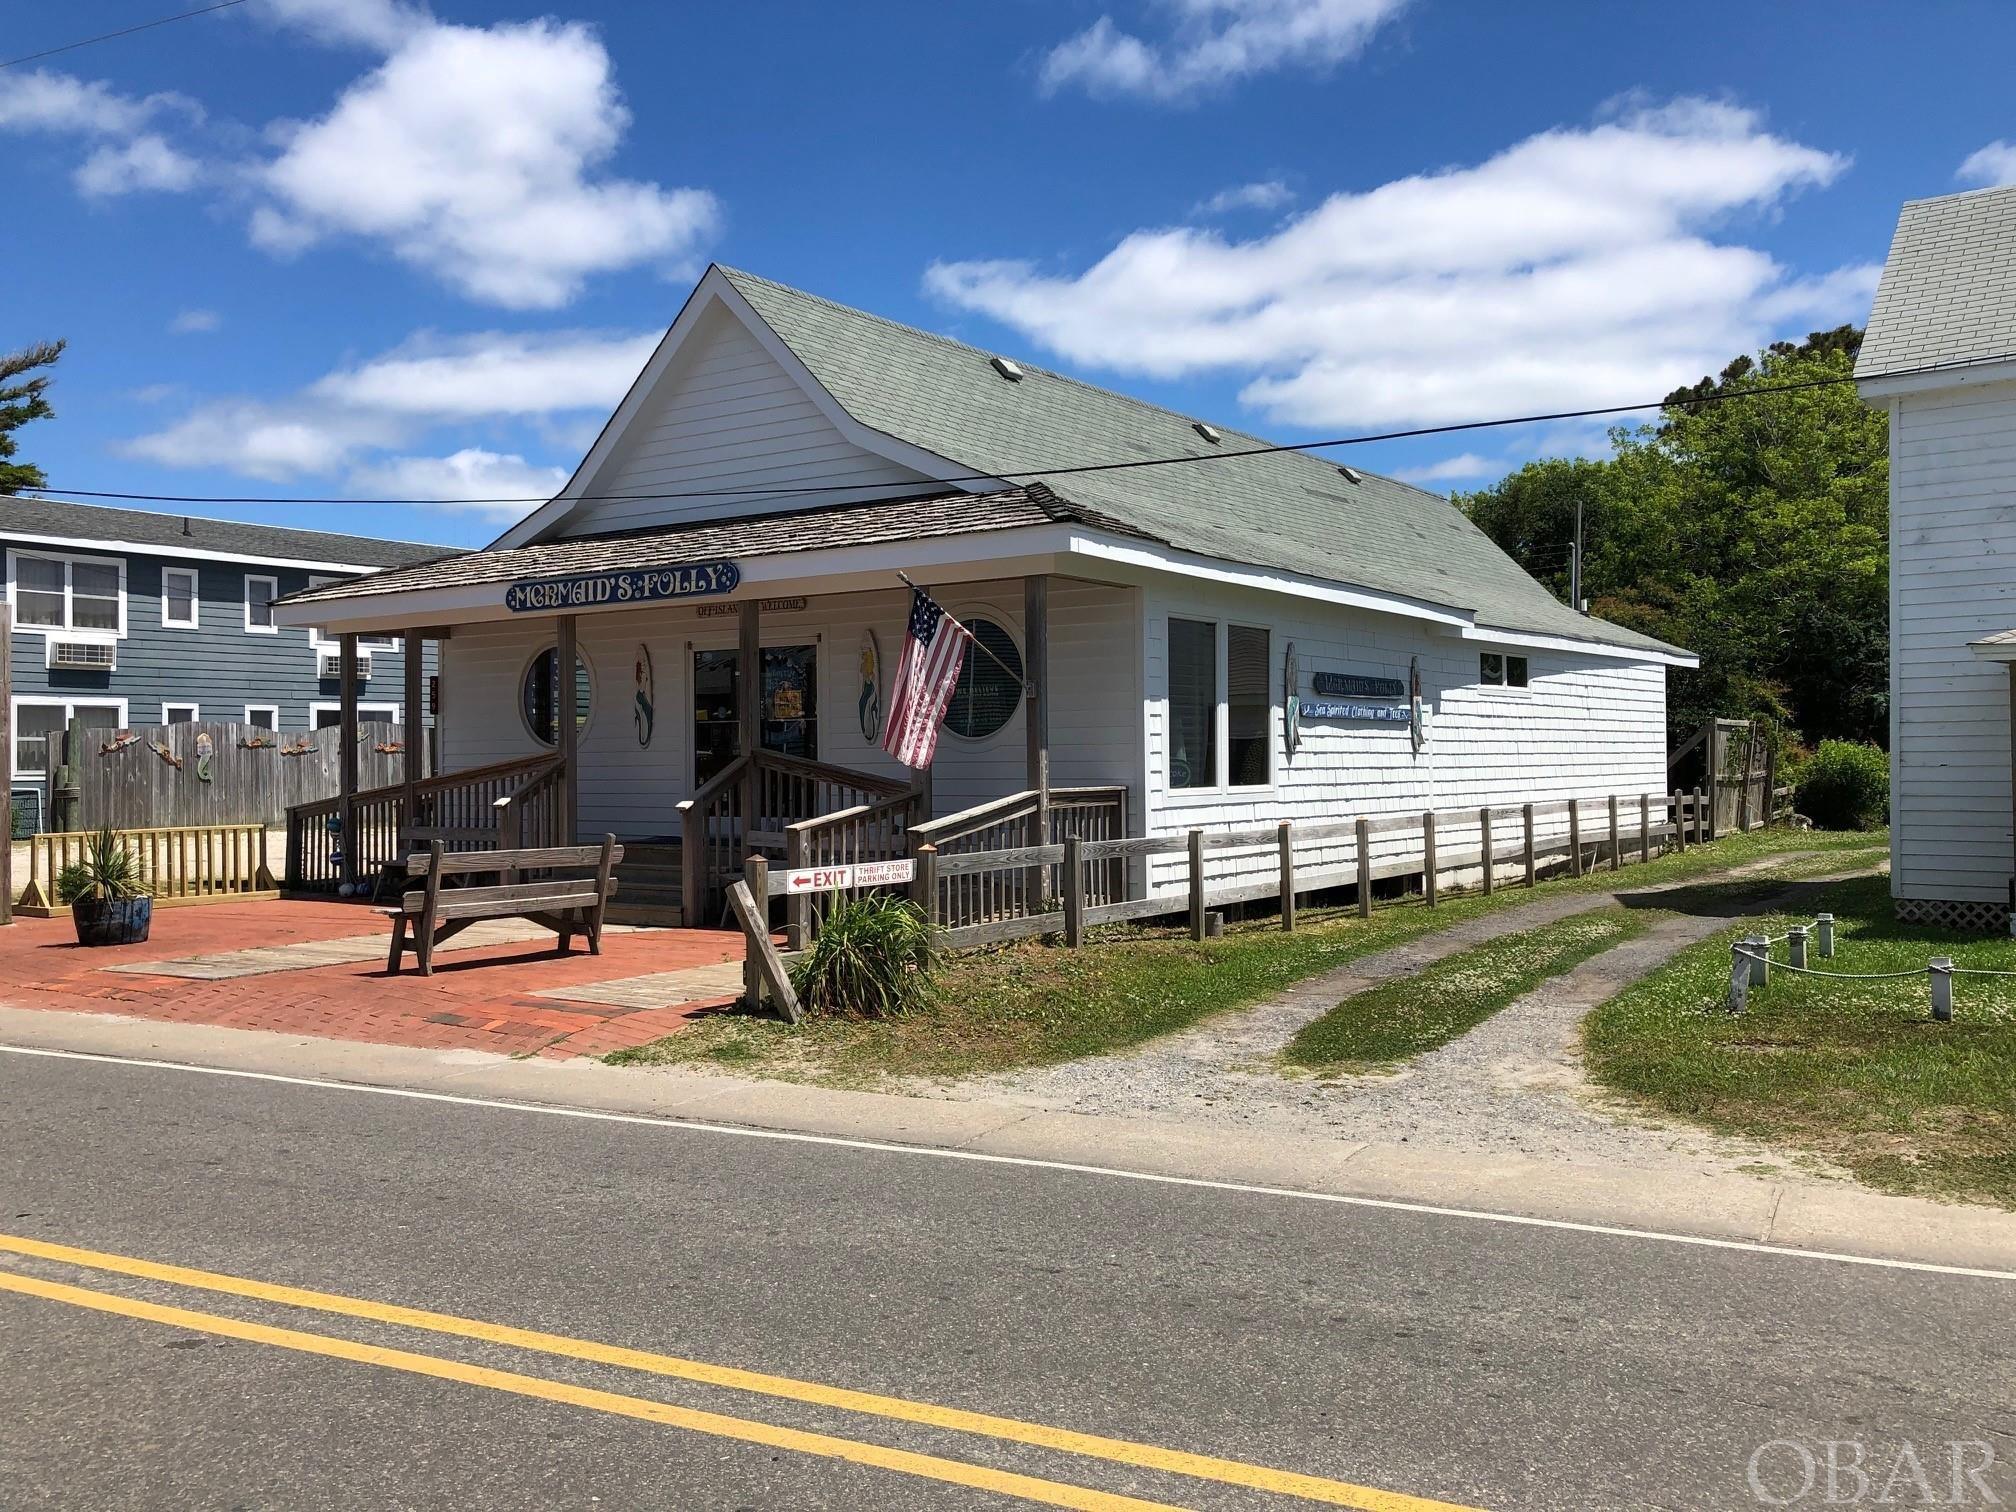 A unique retail building with a brick patio entrance and large welcoming round windows. You can't go by without stopping in! Centrally located in "downtown Ocracoke" with great walk-in and vehicular traffic! Within walking distance of the arrival and departure docking area of the passenger ferry. To add to the walk-in traffic, an island tram stop is located across the street. Currently being used as successful retail shop (Mermaid's Folly). Amenities include wood floors, vaulted ceilings with wooden beams, ceiling fans, track lighting, wood walls, office with 1/2 bath, central heat /ac, dressing rooms and a custom built wooden check out counter. Cedar shake exterior, partially fenced yard, side parking area and small storage shed.  2000 square feet of beautiful retail space! The business/goodwill/inventory/merchandise fixtures do not convey; however, they may be purchased separately.